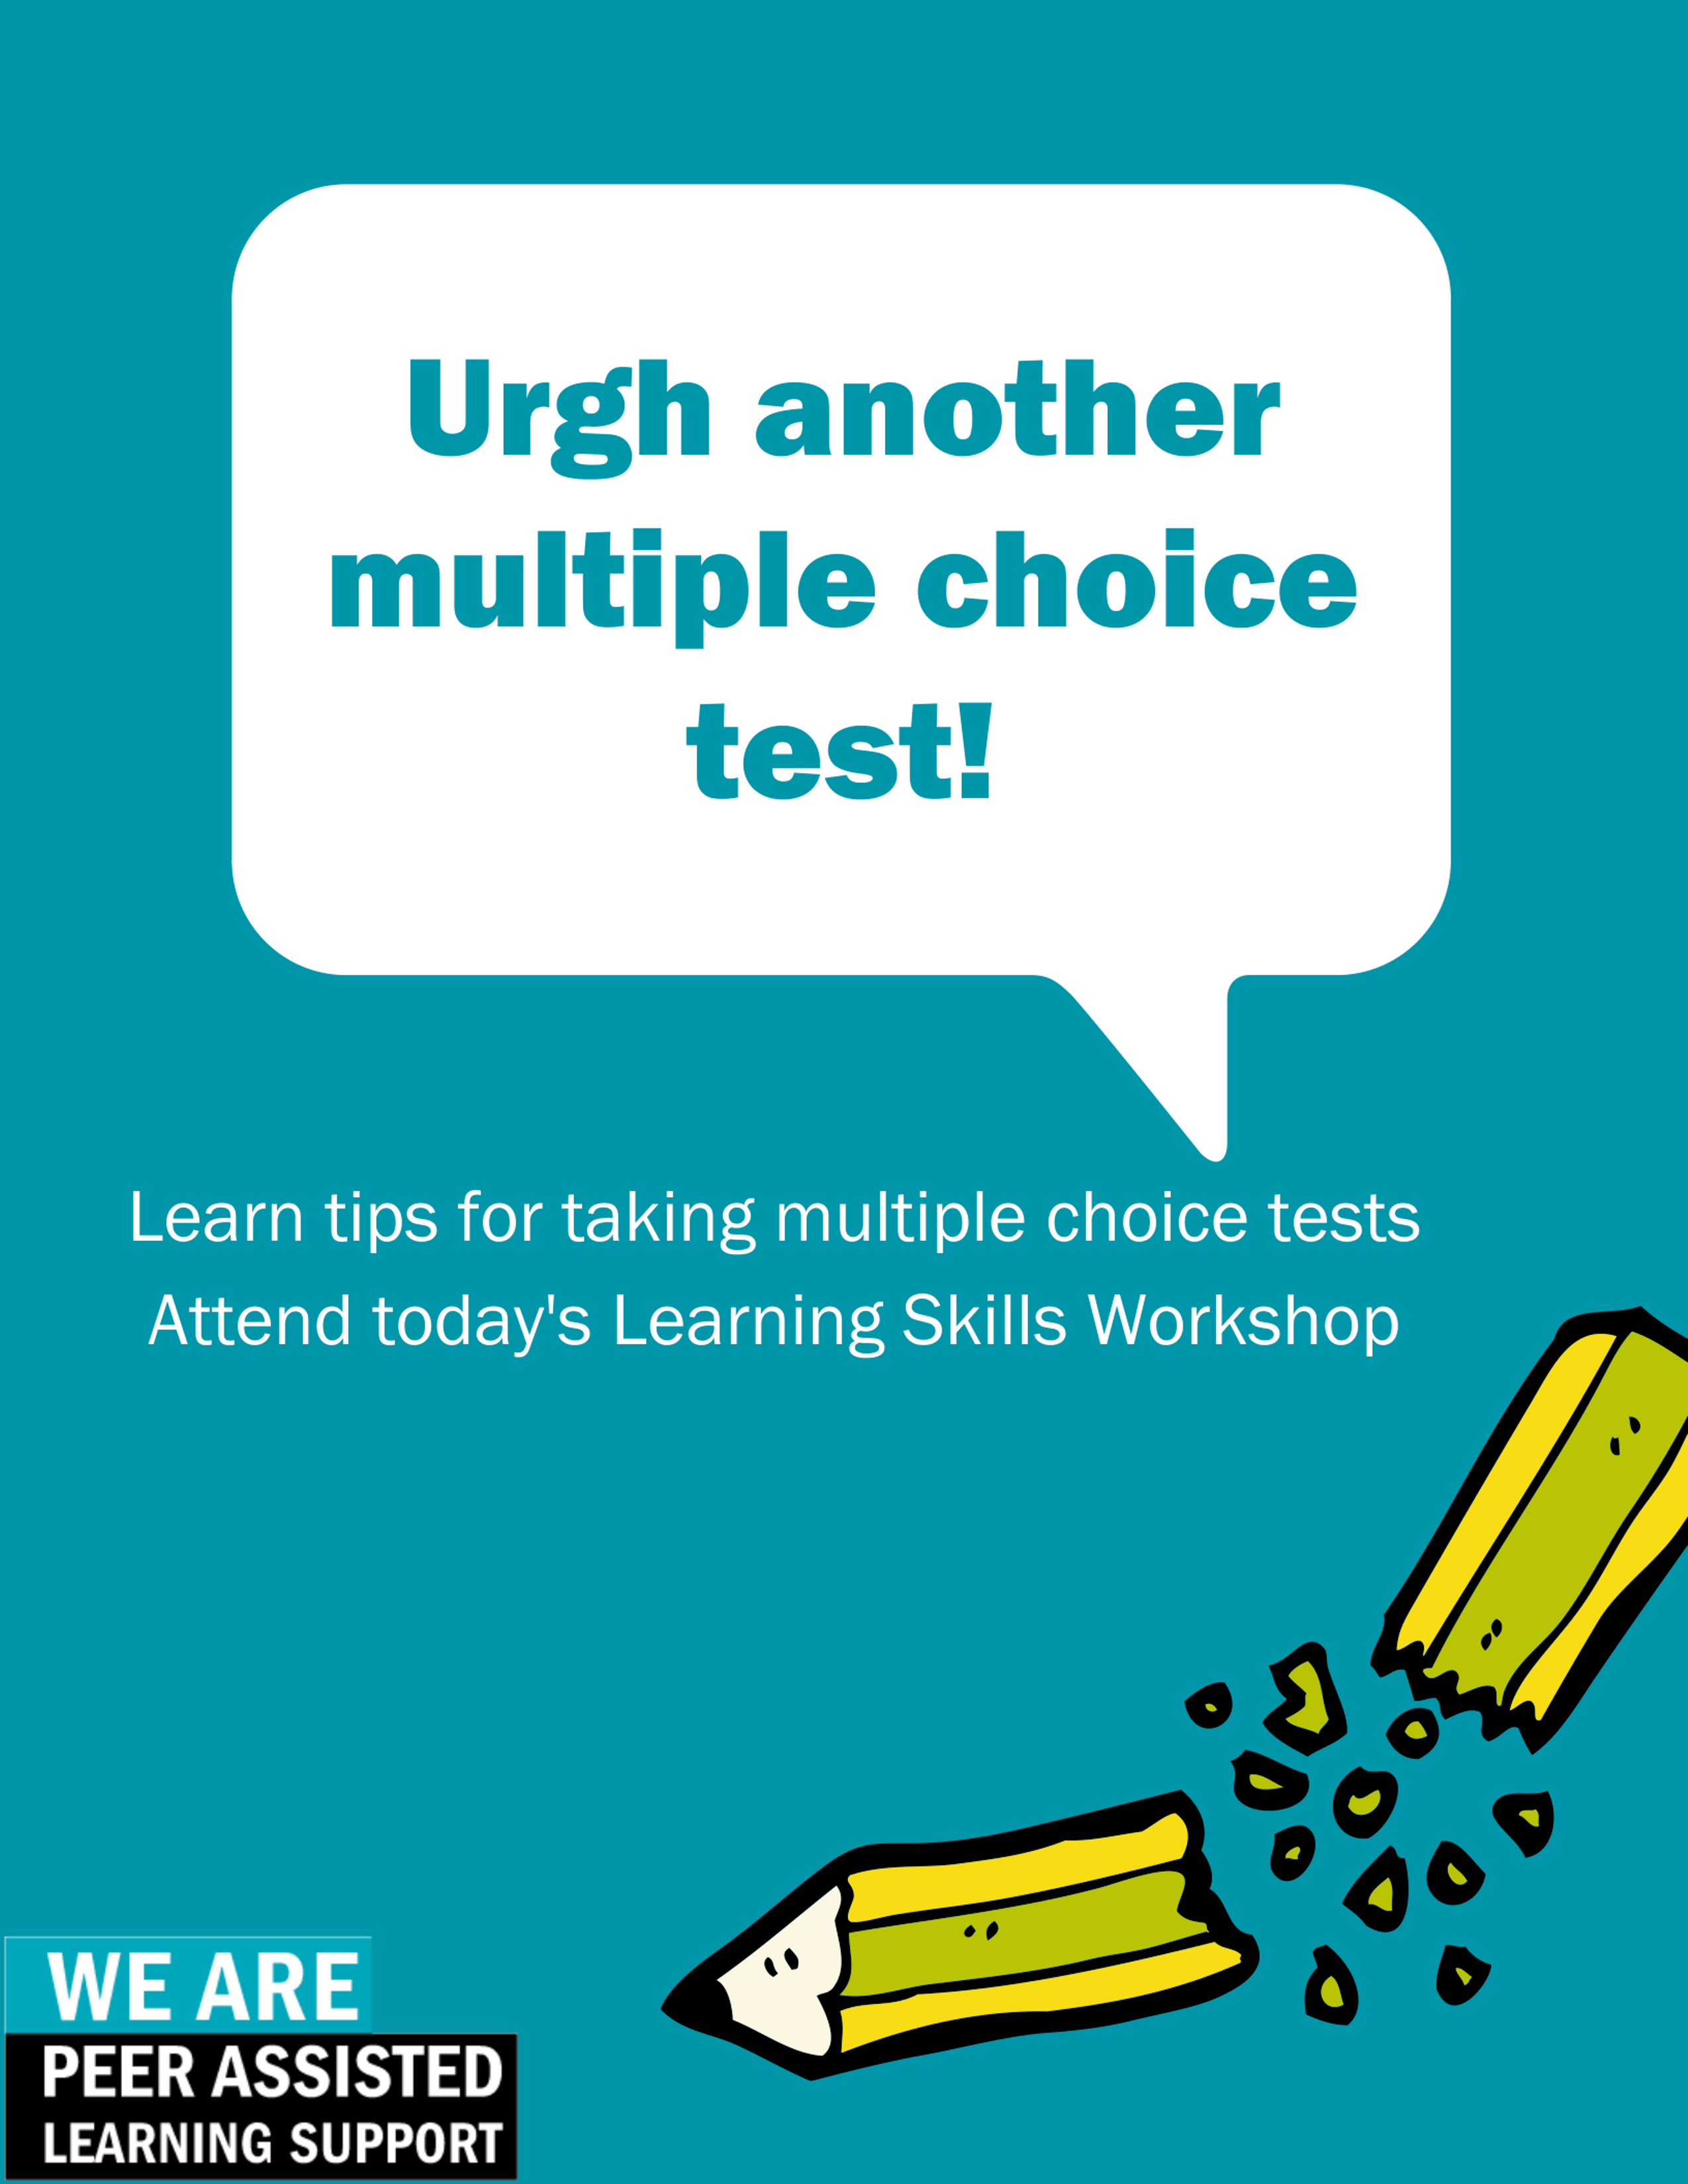 Learn some tips on prepping and taking multiple choice tests and exams. 